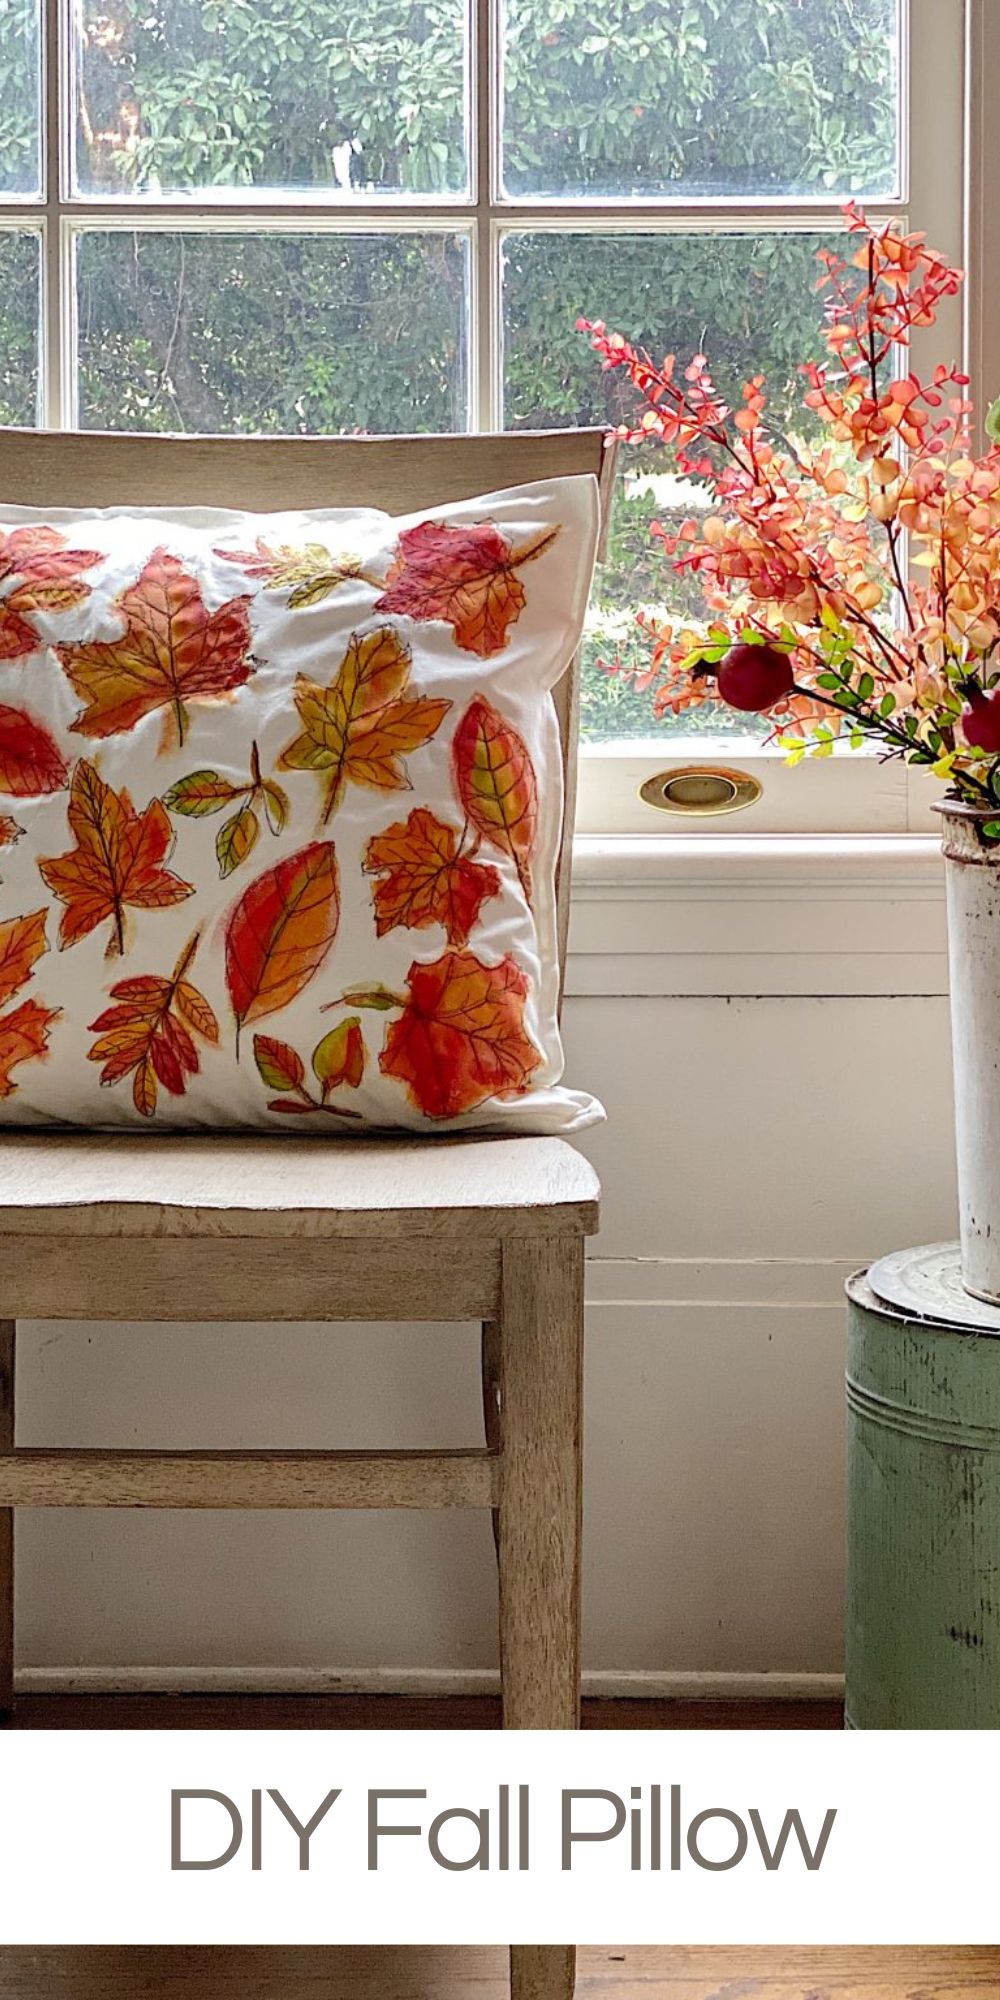 The colors of fall are maybe my favorite and I combined two of my passions, art and sewing, to create these amazing fall pillows. 